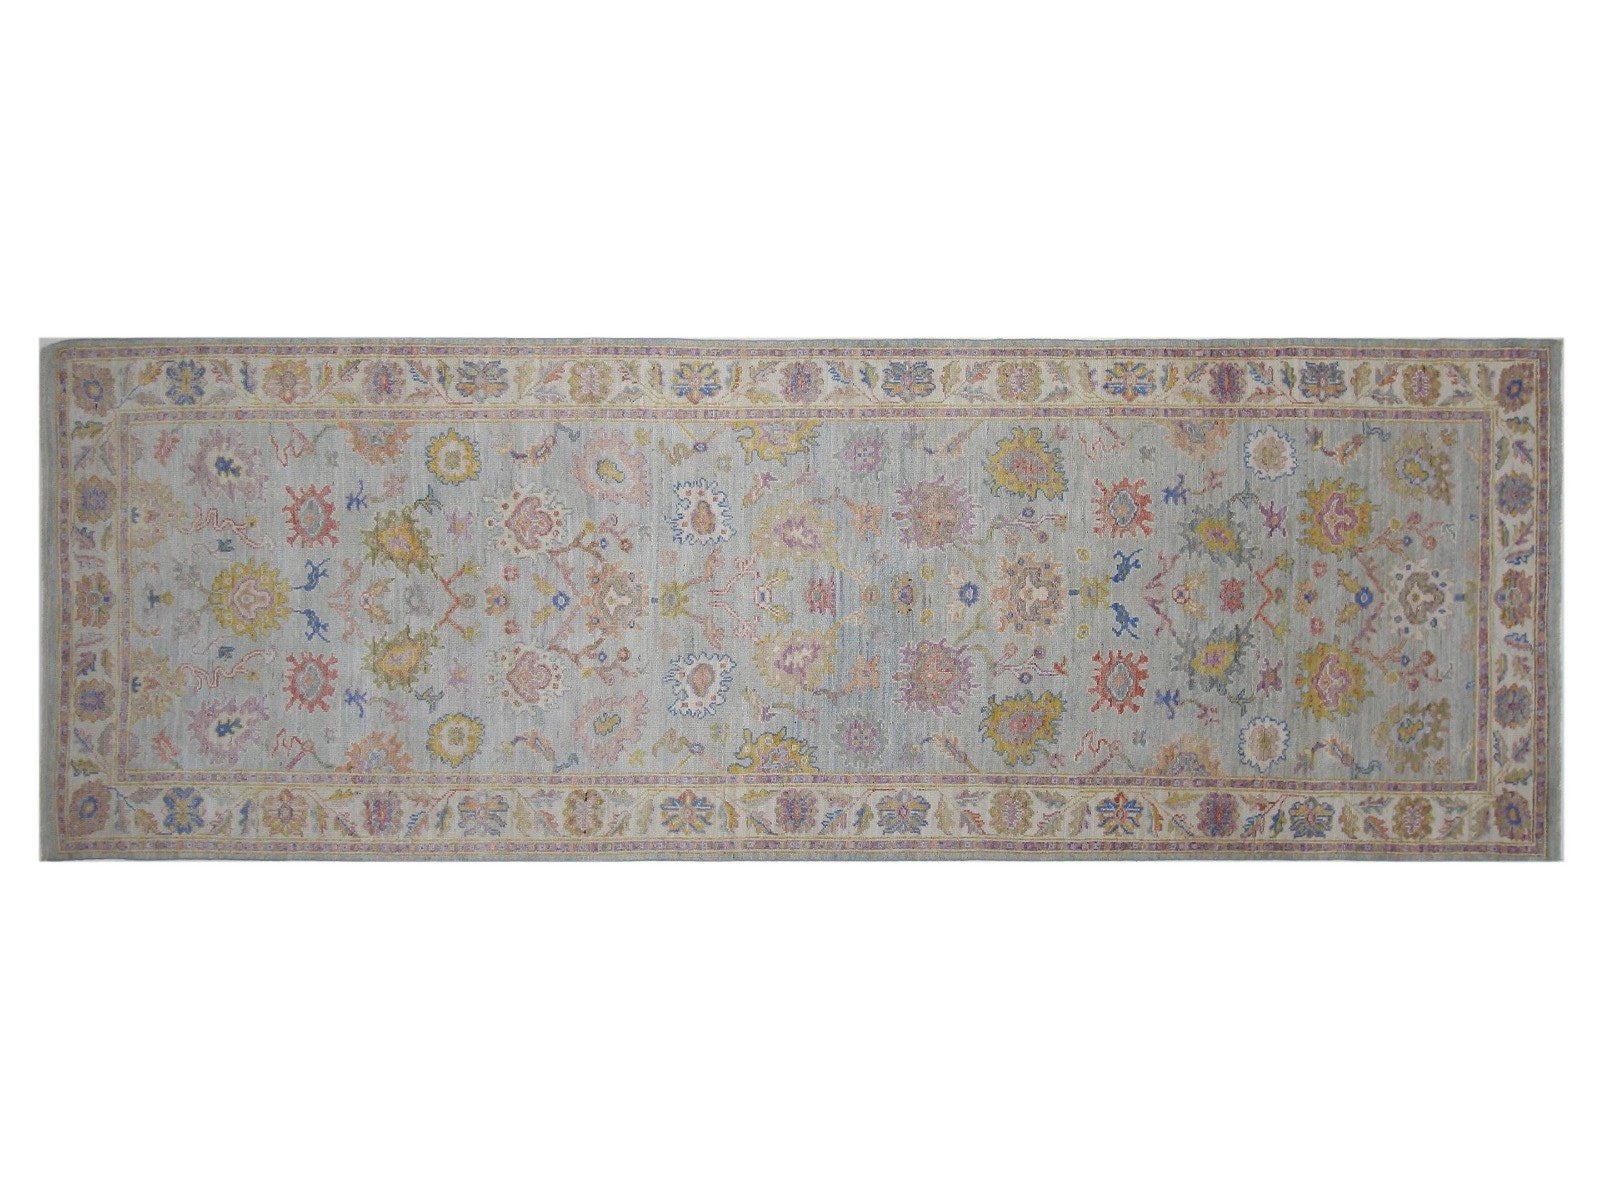 5x15 Oushak runner rug in light blue with a neutral border, showcasing traditional design, ideal for hallways.